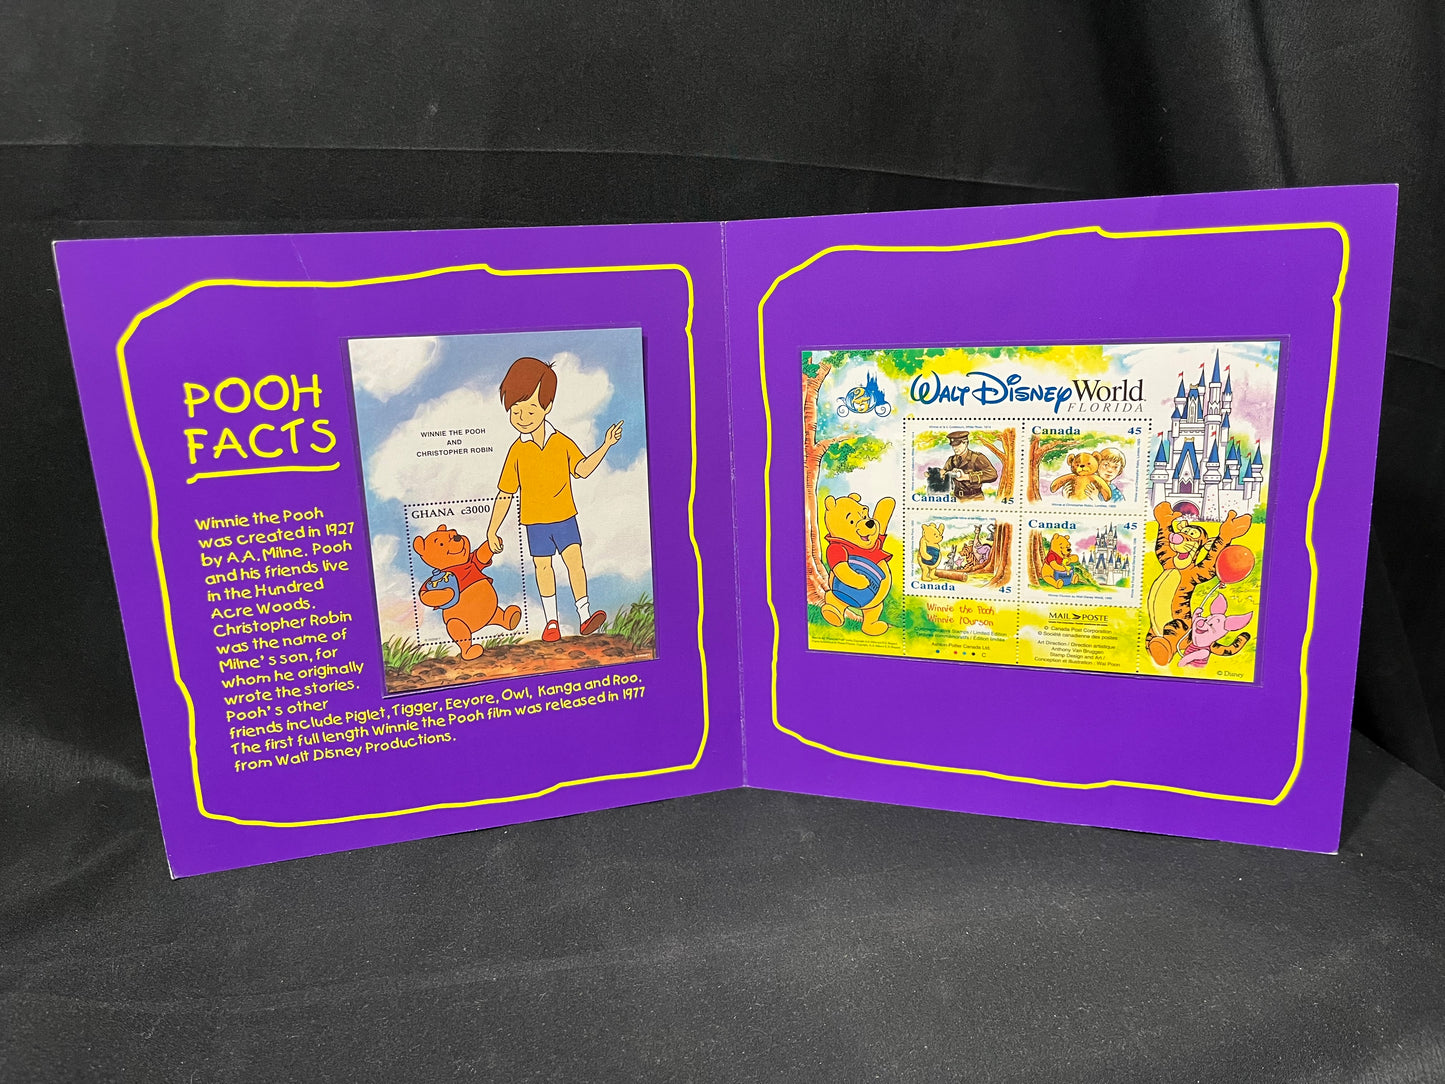 Winnie The Pooh Canadian Postage Stamps - Limited Edition